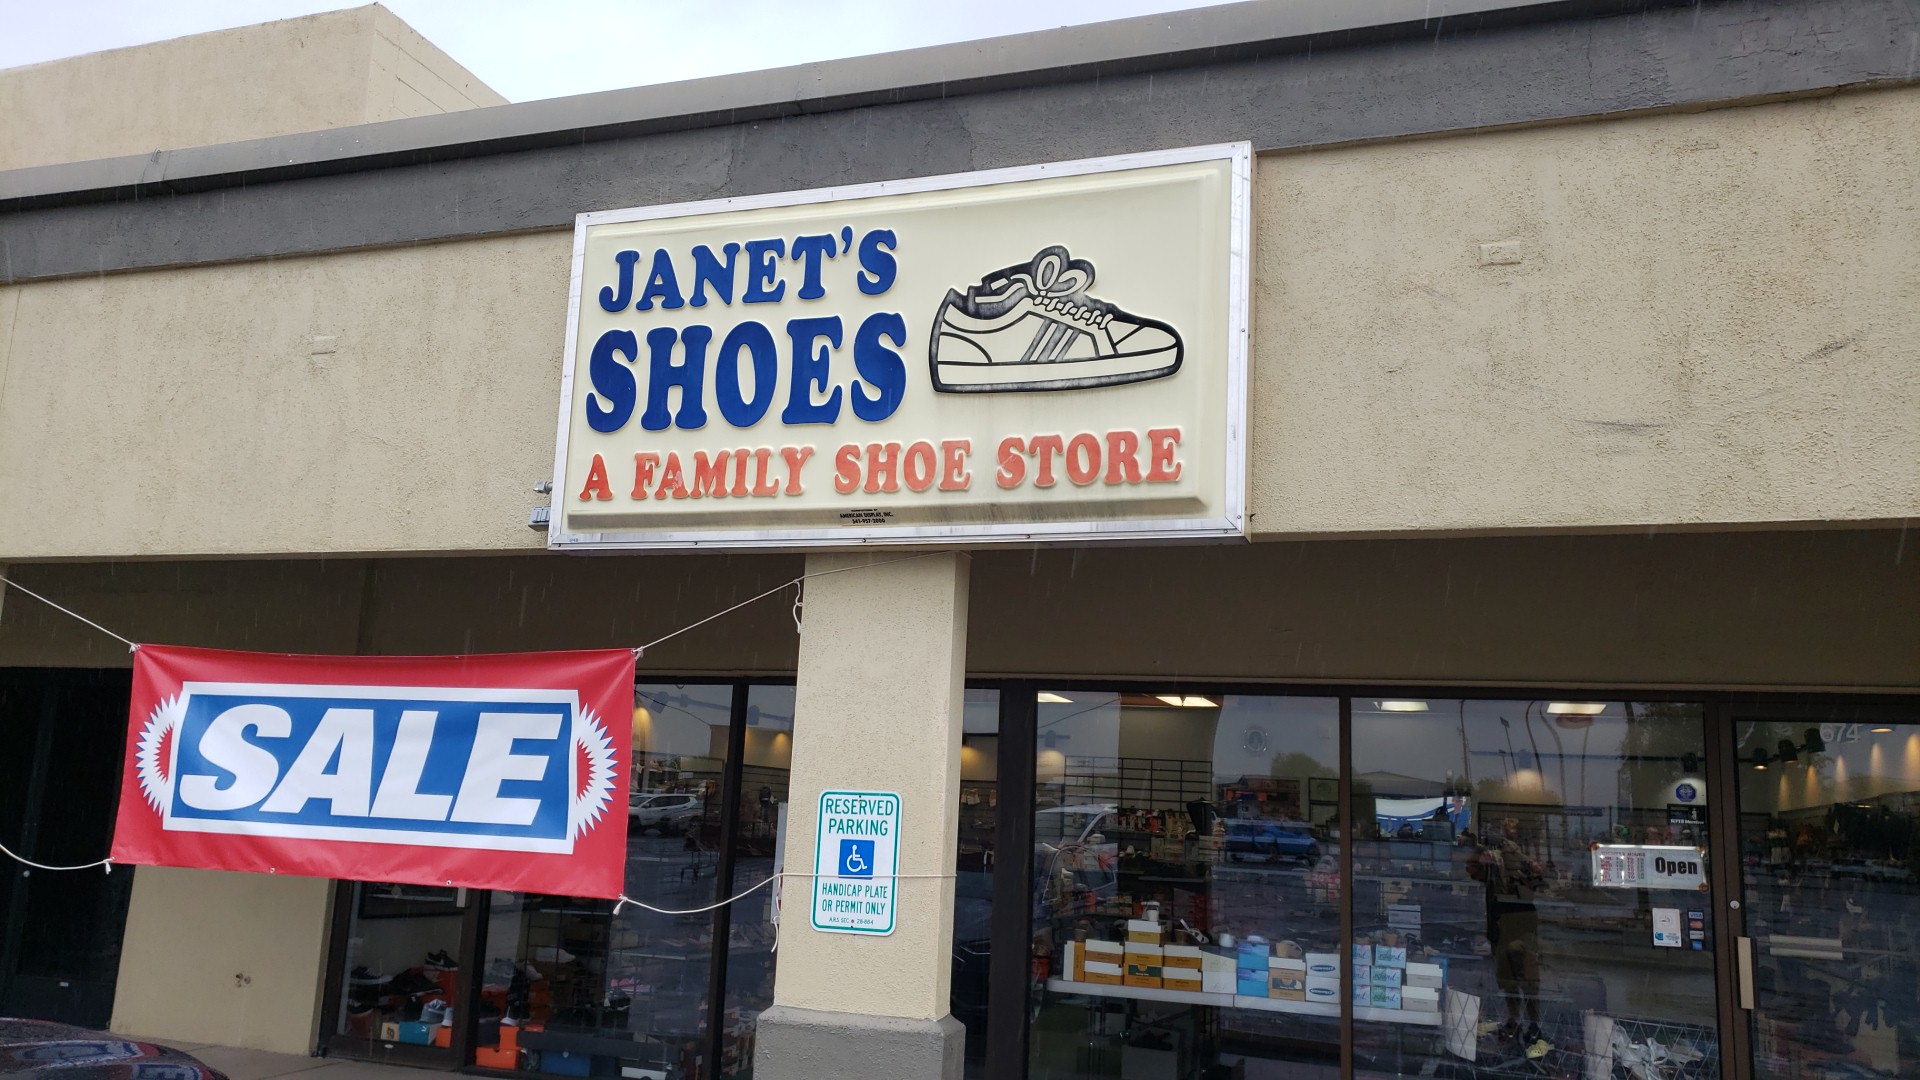 Janet's Shoes